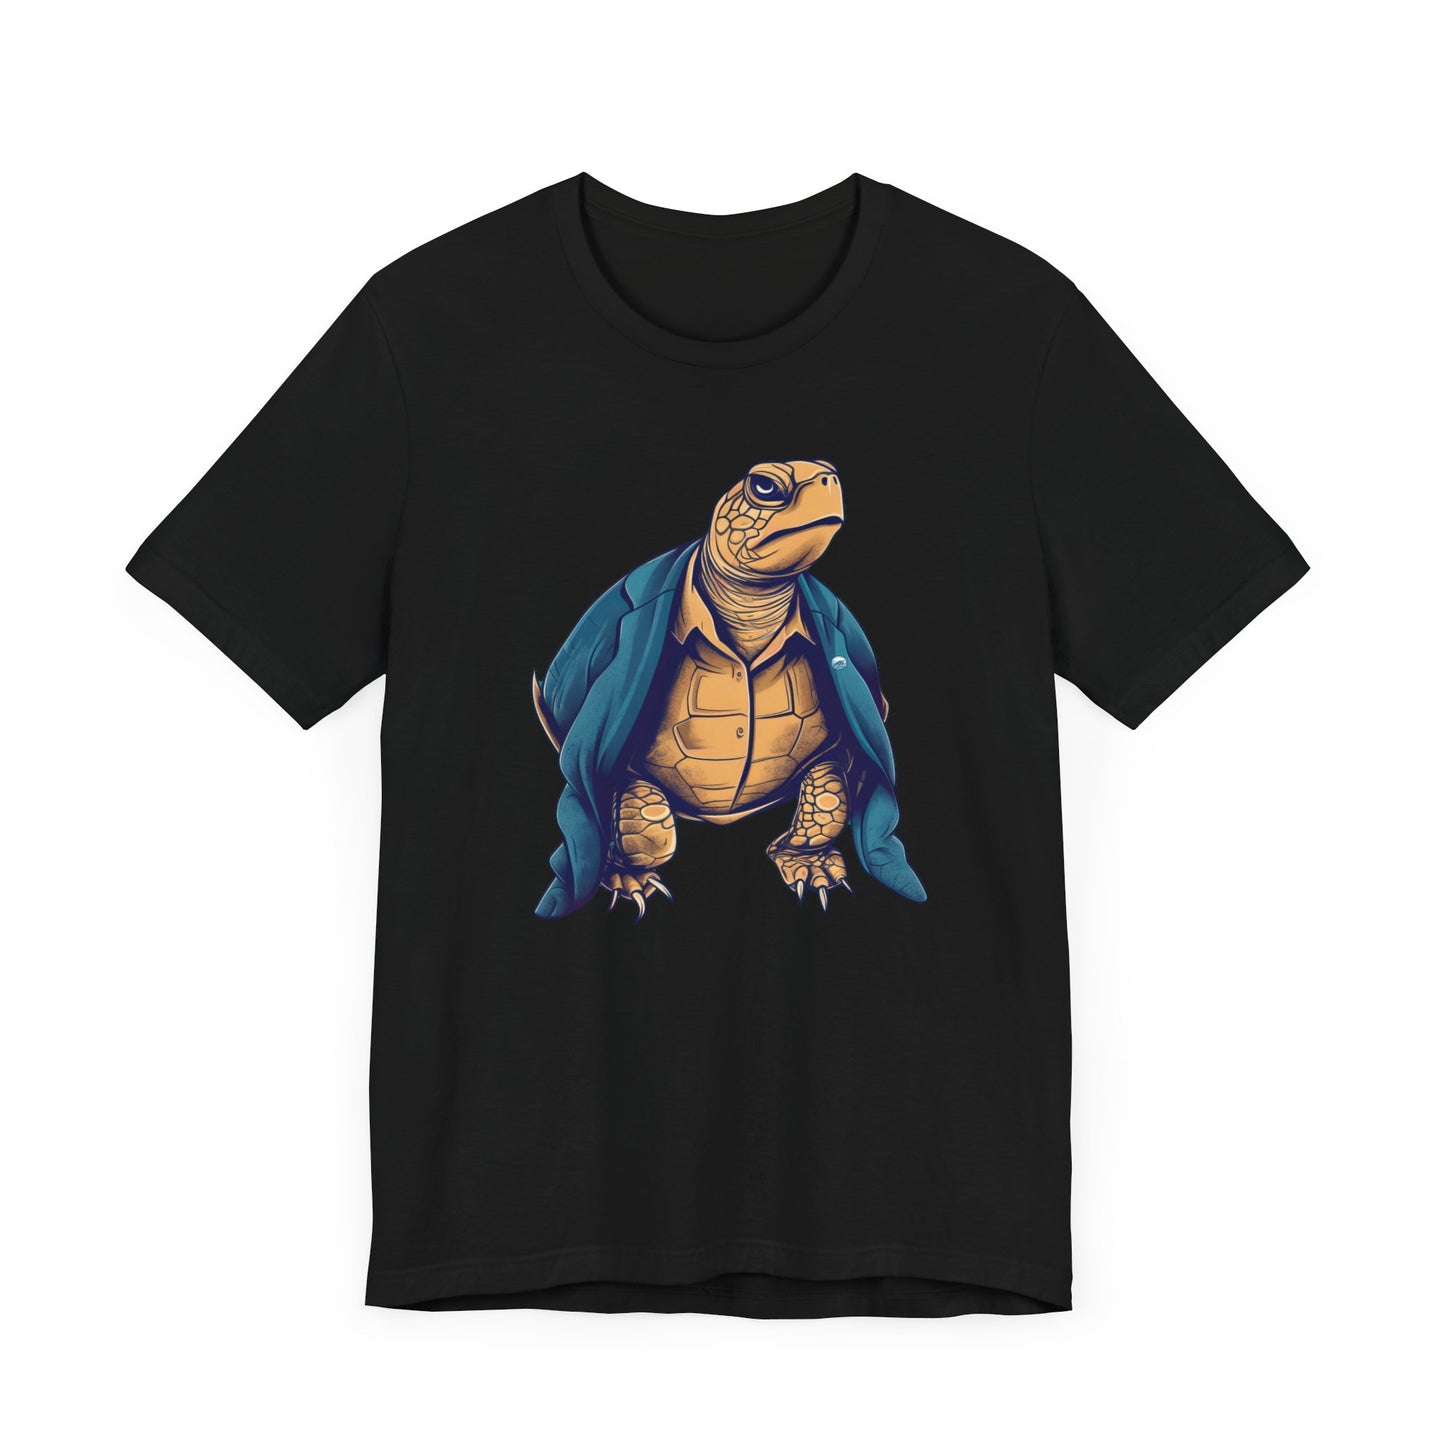 Paco Turtle Graphic Tee - Unisex Eco-Friendly Cotton Shirt by JD Cove